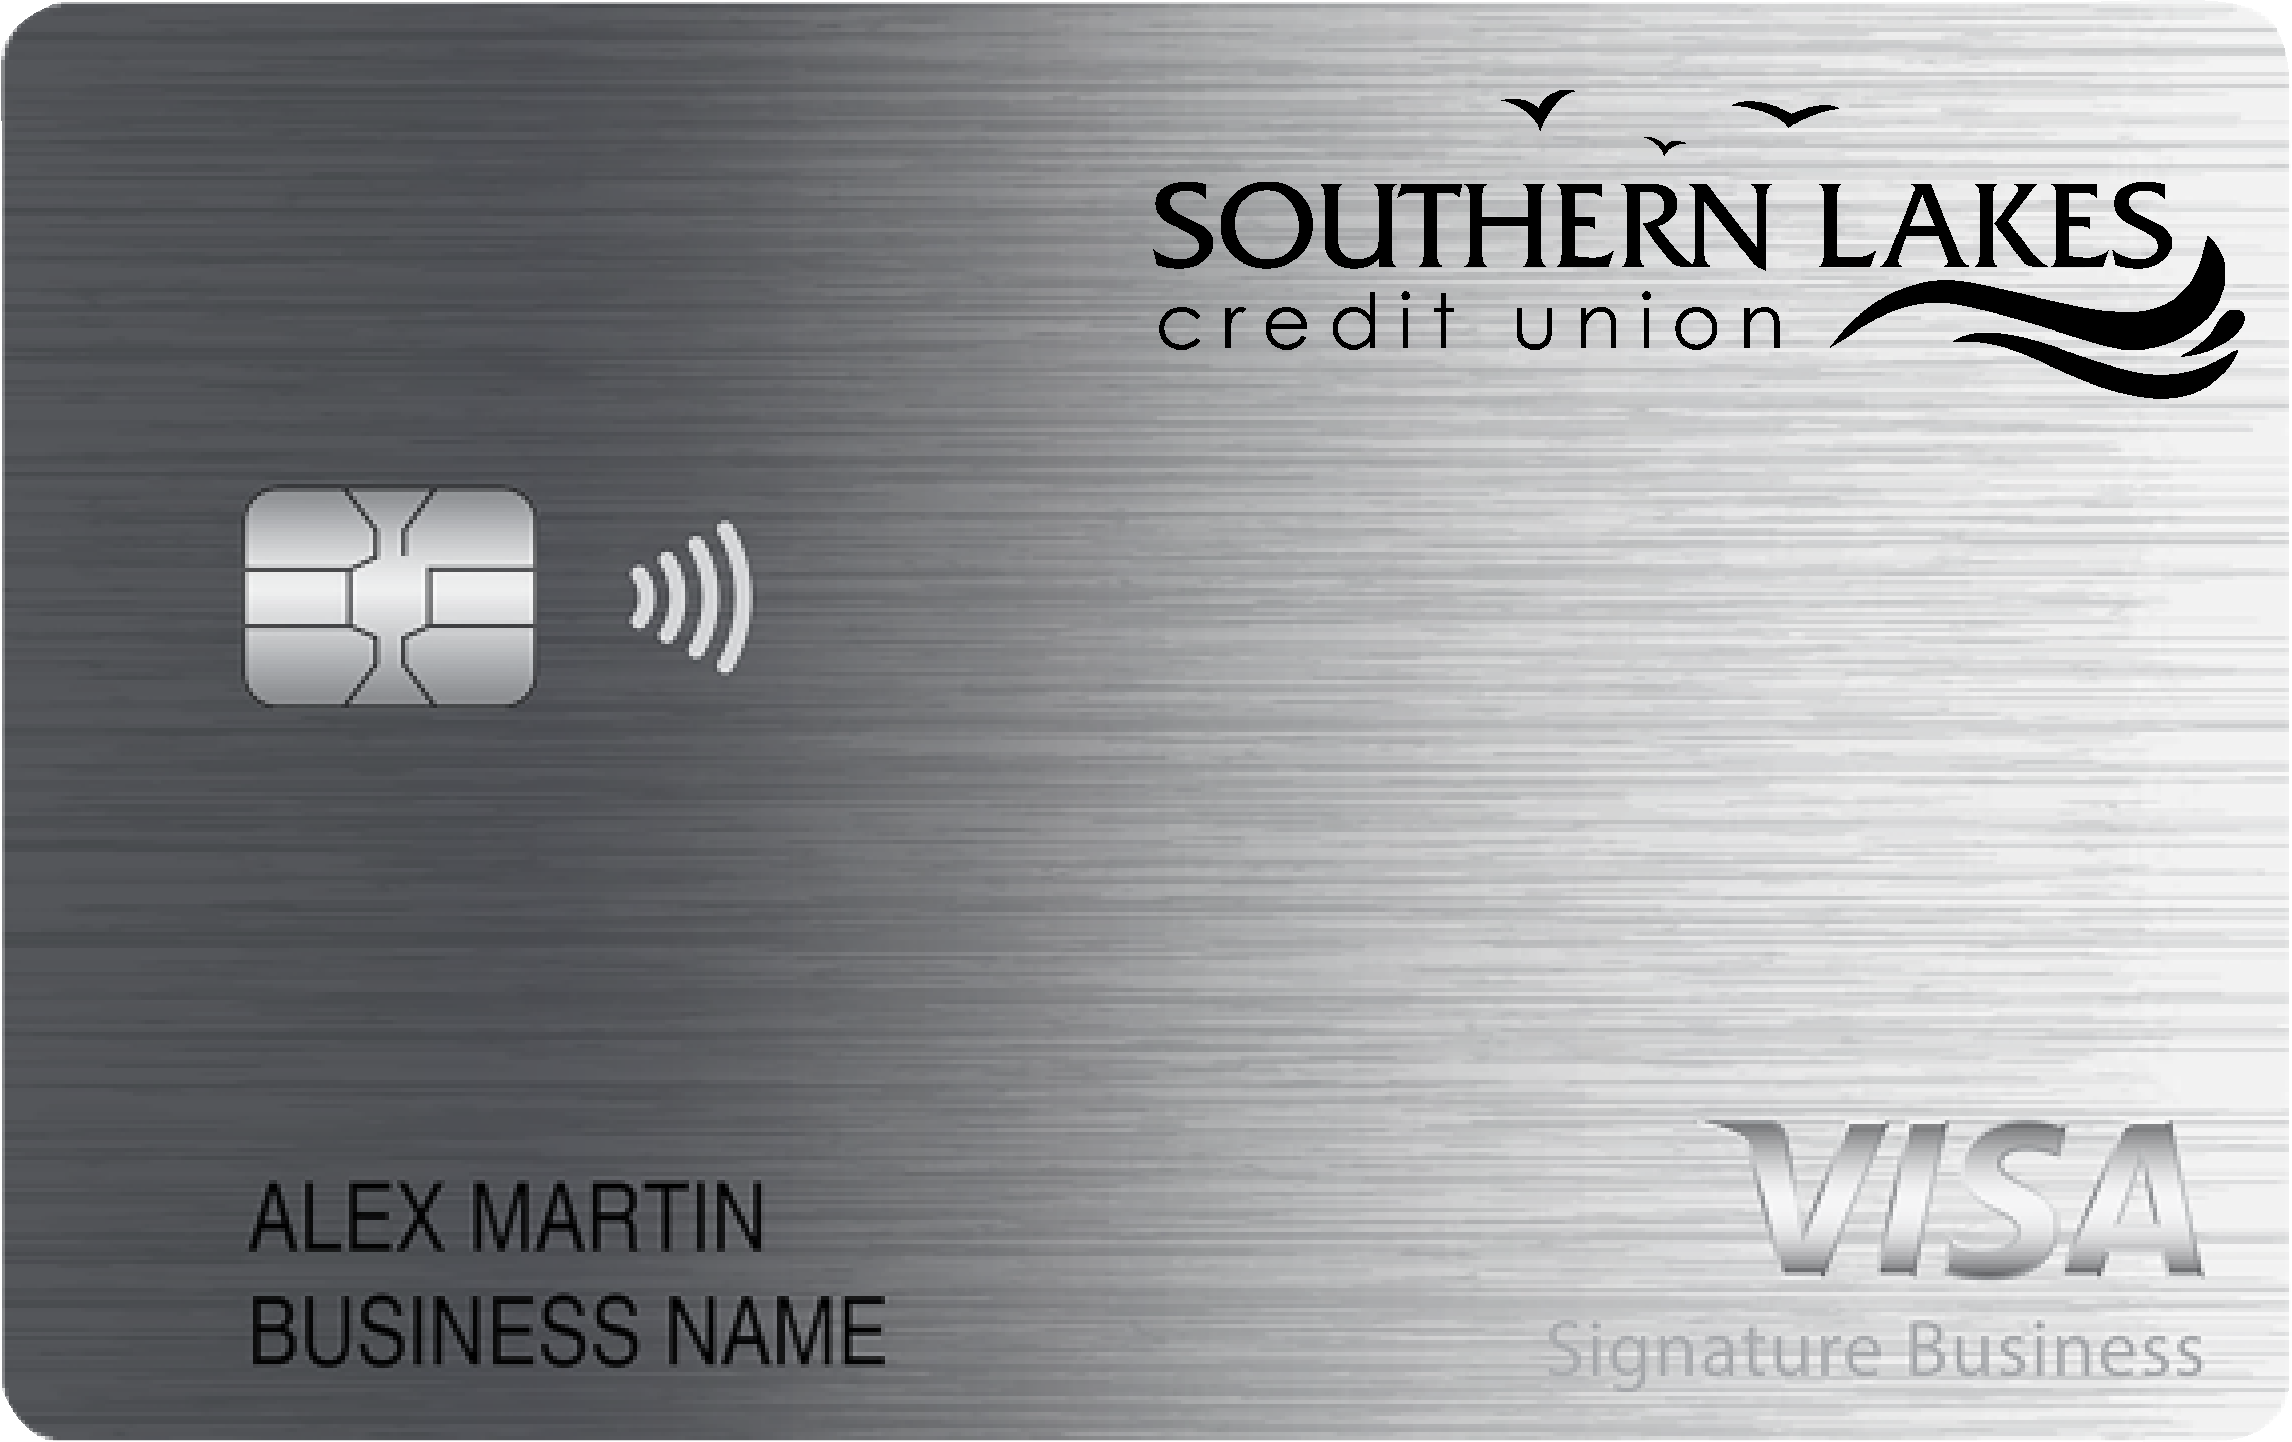 Southern Lakes Credit Union Smart Business Rewards Card